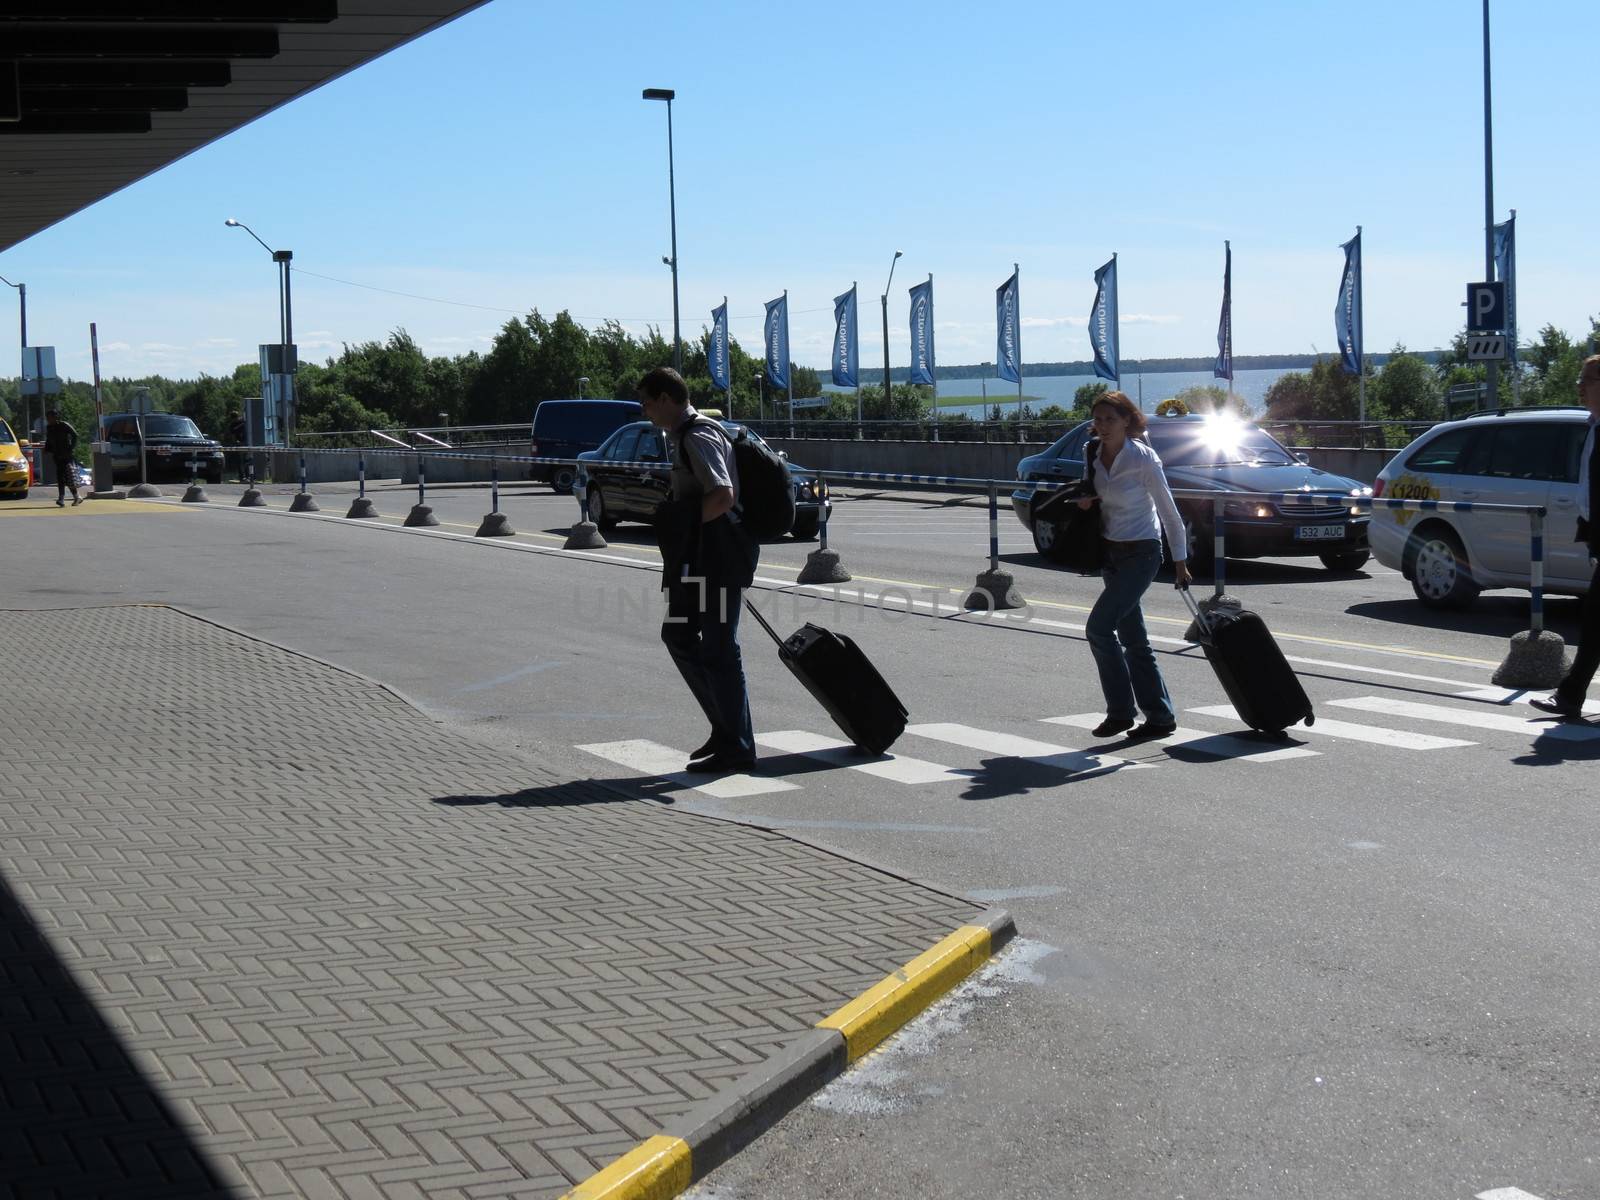 travellers with their luggage at the airport by paolo77